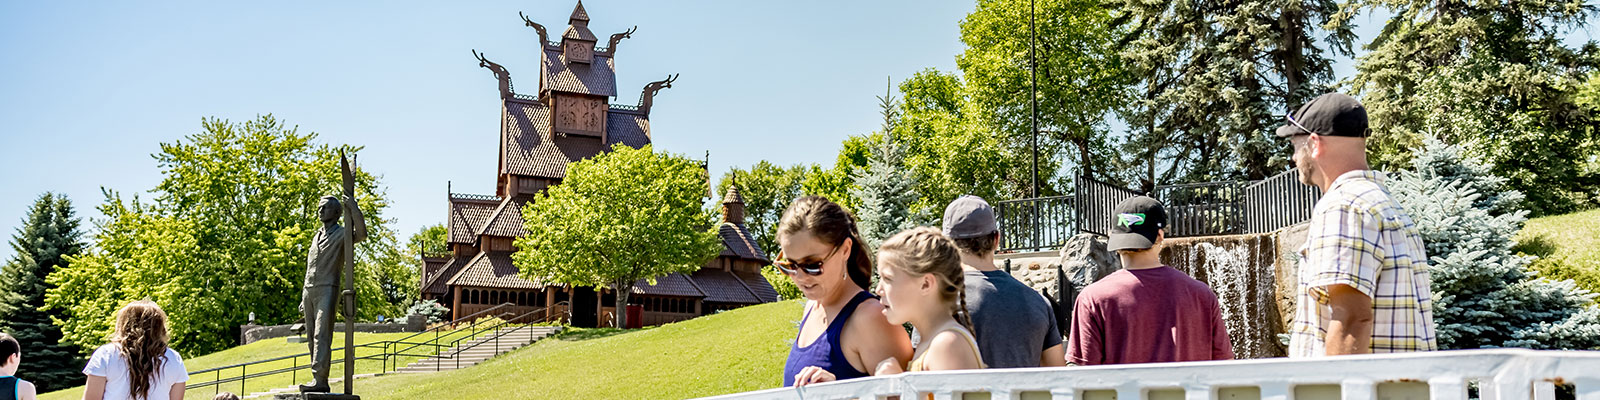 Family at the Scandinavian Heritage Park in Minot